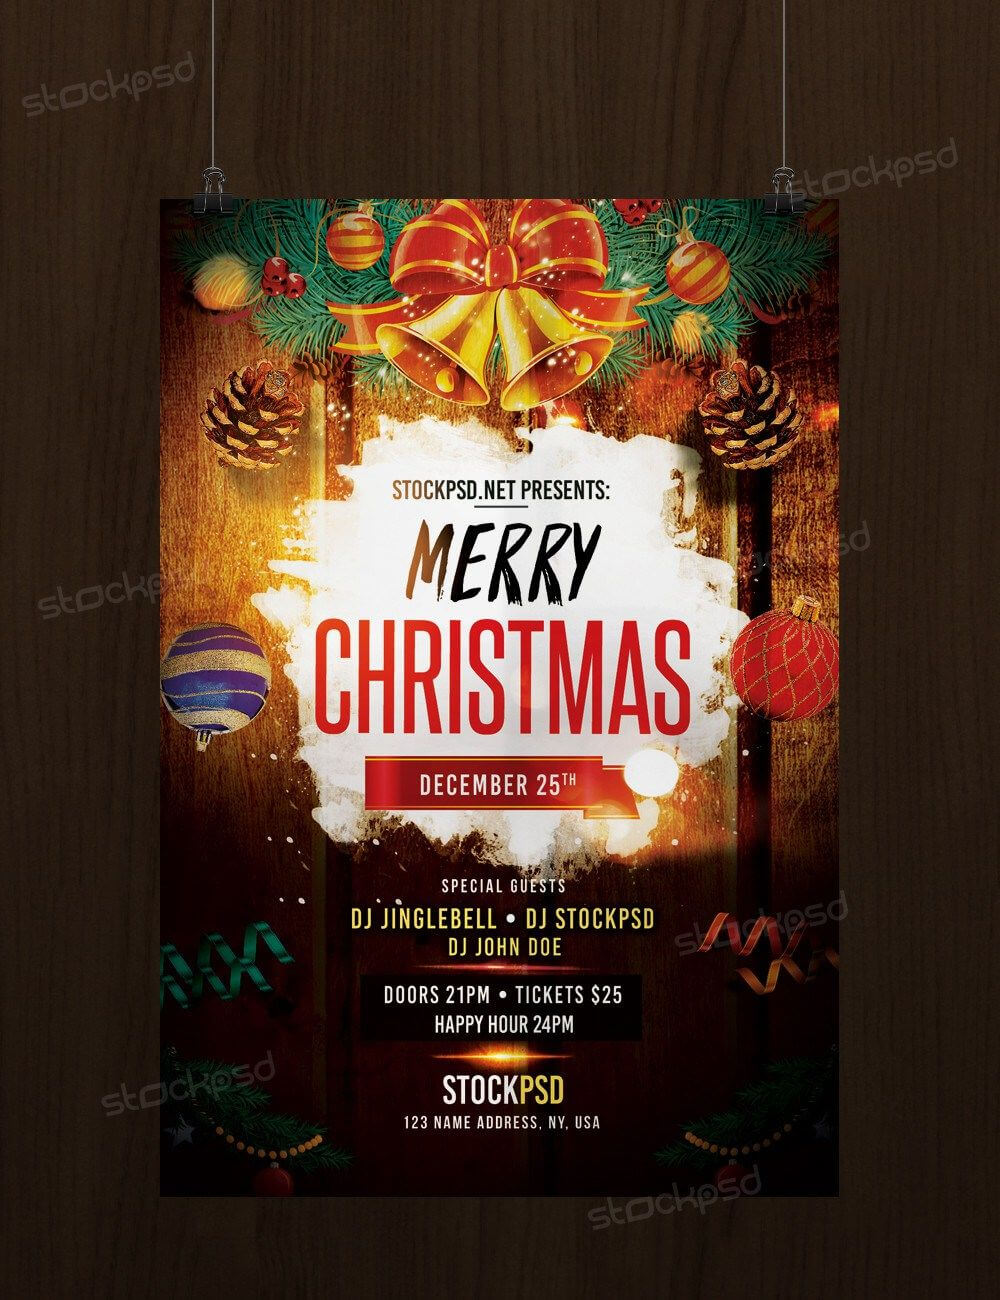 Download Merry Christmas – Free Psd Flyer Template | Free Regarding Christmas Brochure Templates Free